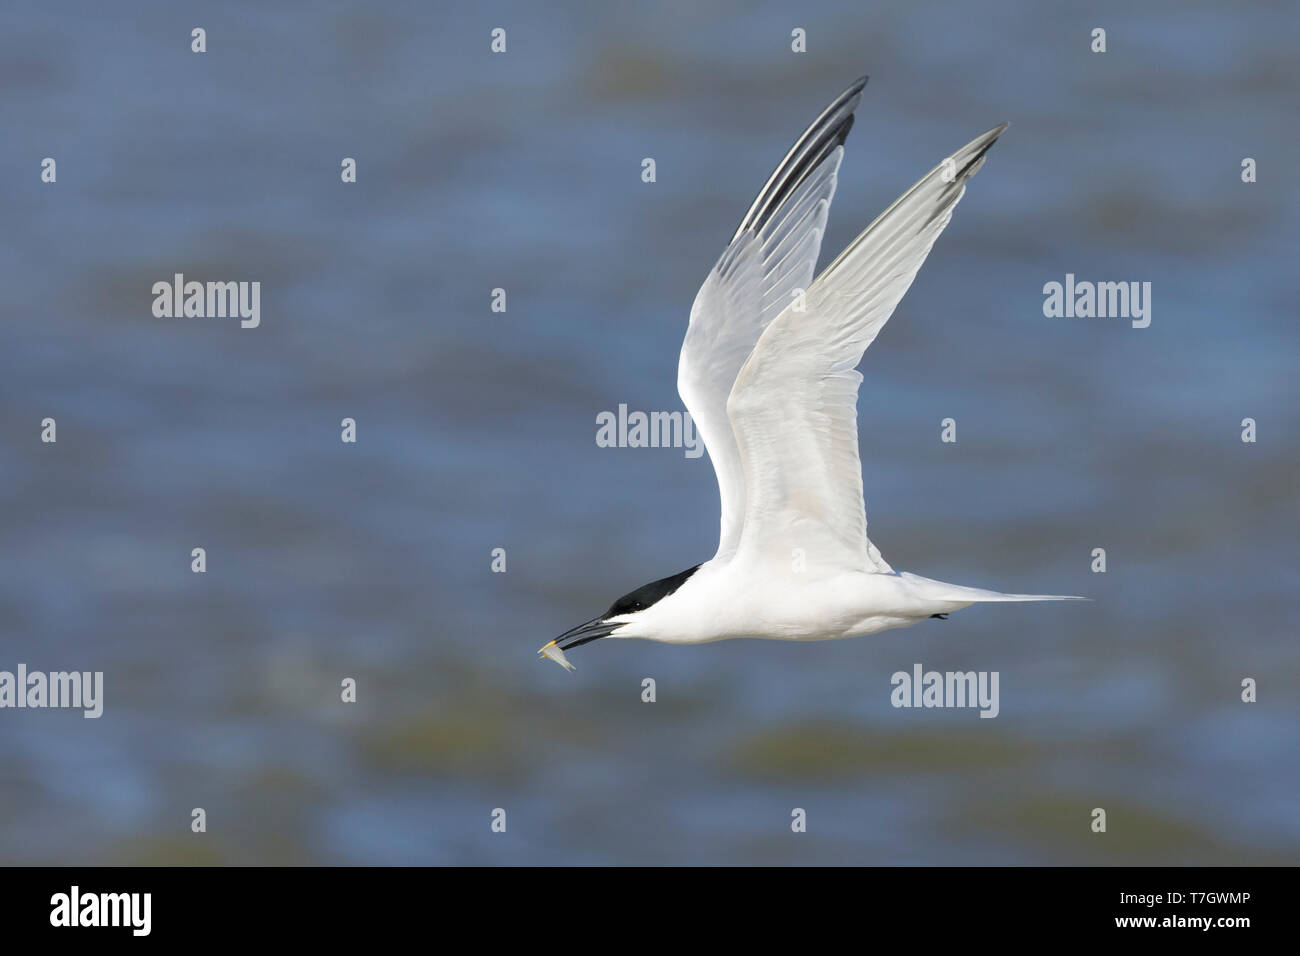 Adult Cabot's Tern, Thalasseus acuflavidus Galveston Co., Texas. Flying against the sea as a background. Stock Photo